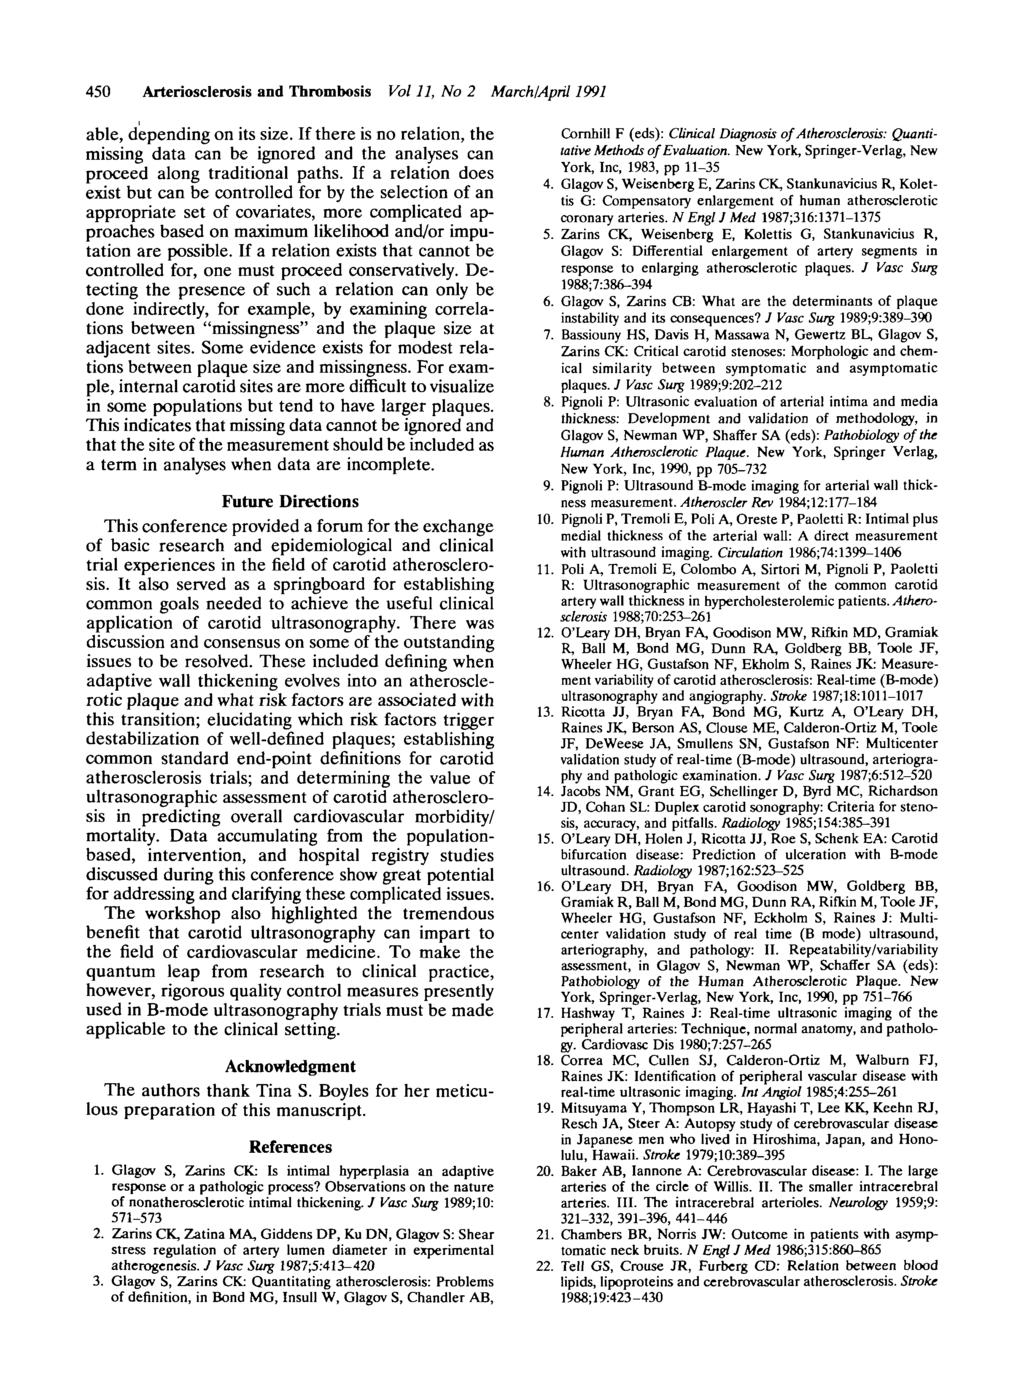 450 Arteriosclerosis and Thrombosis Vol 11, No 2 March/April 1991 able, depending on its size.